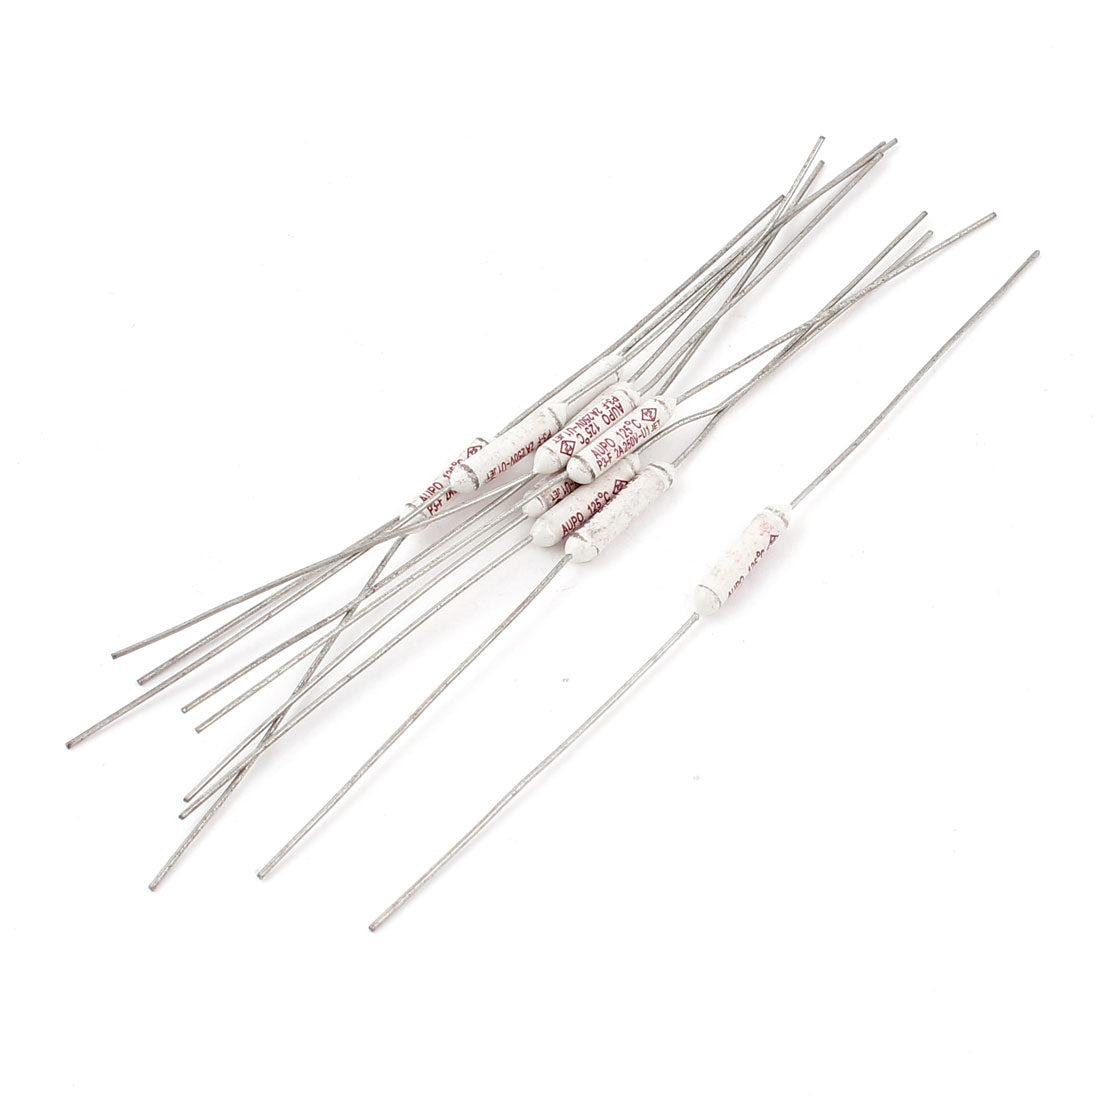 uxcell Uxcell 10 Pcs Axial Leads Metal 125 Celsius Temperature Thermal Fuses AC 250V 2A